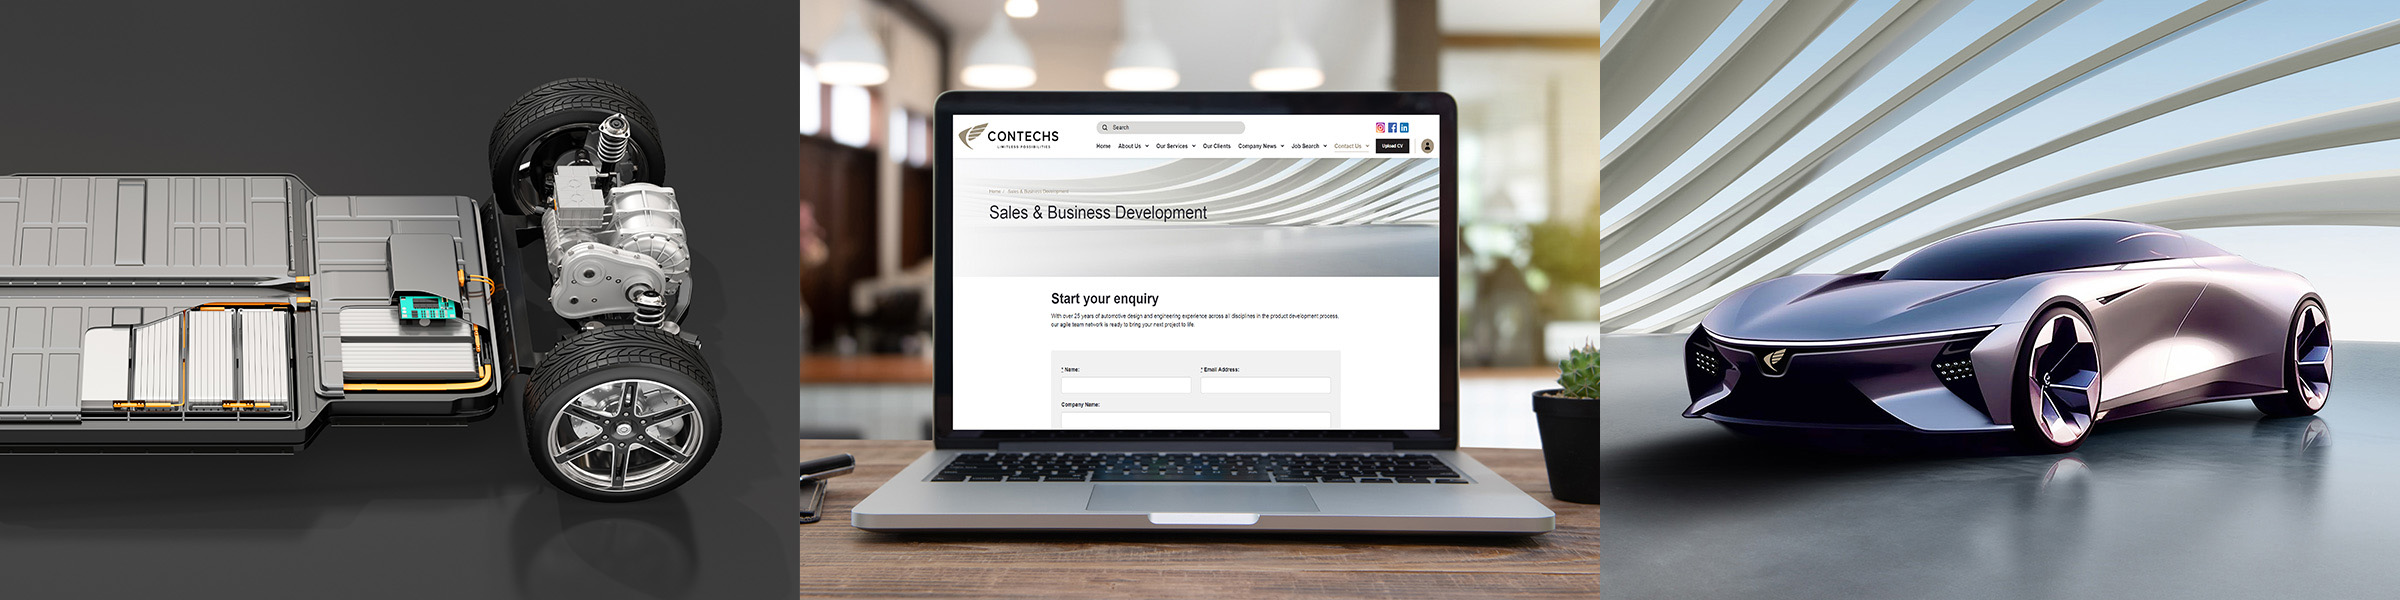 Contechs sales and business development